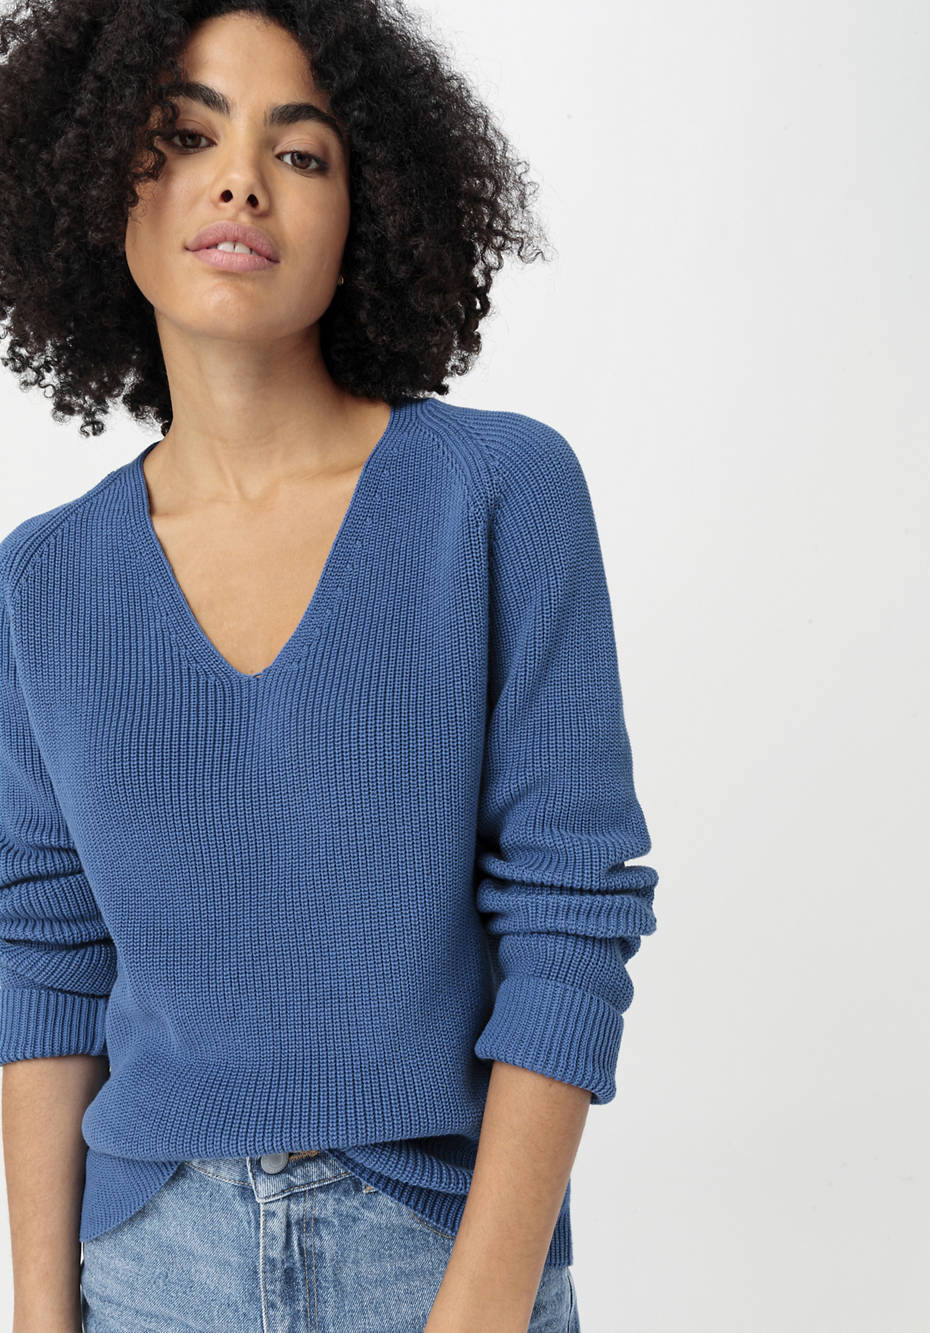 V-neck sweater made from pure organic cotton